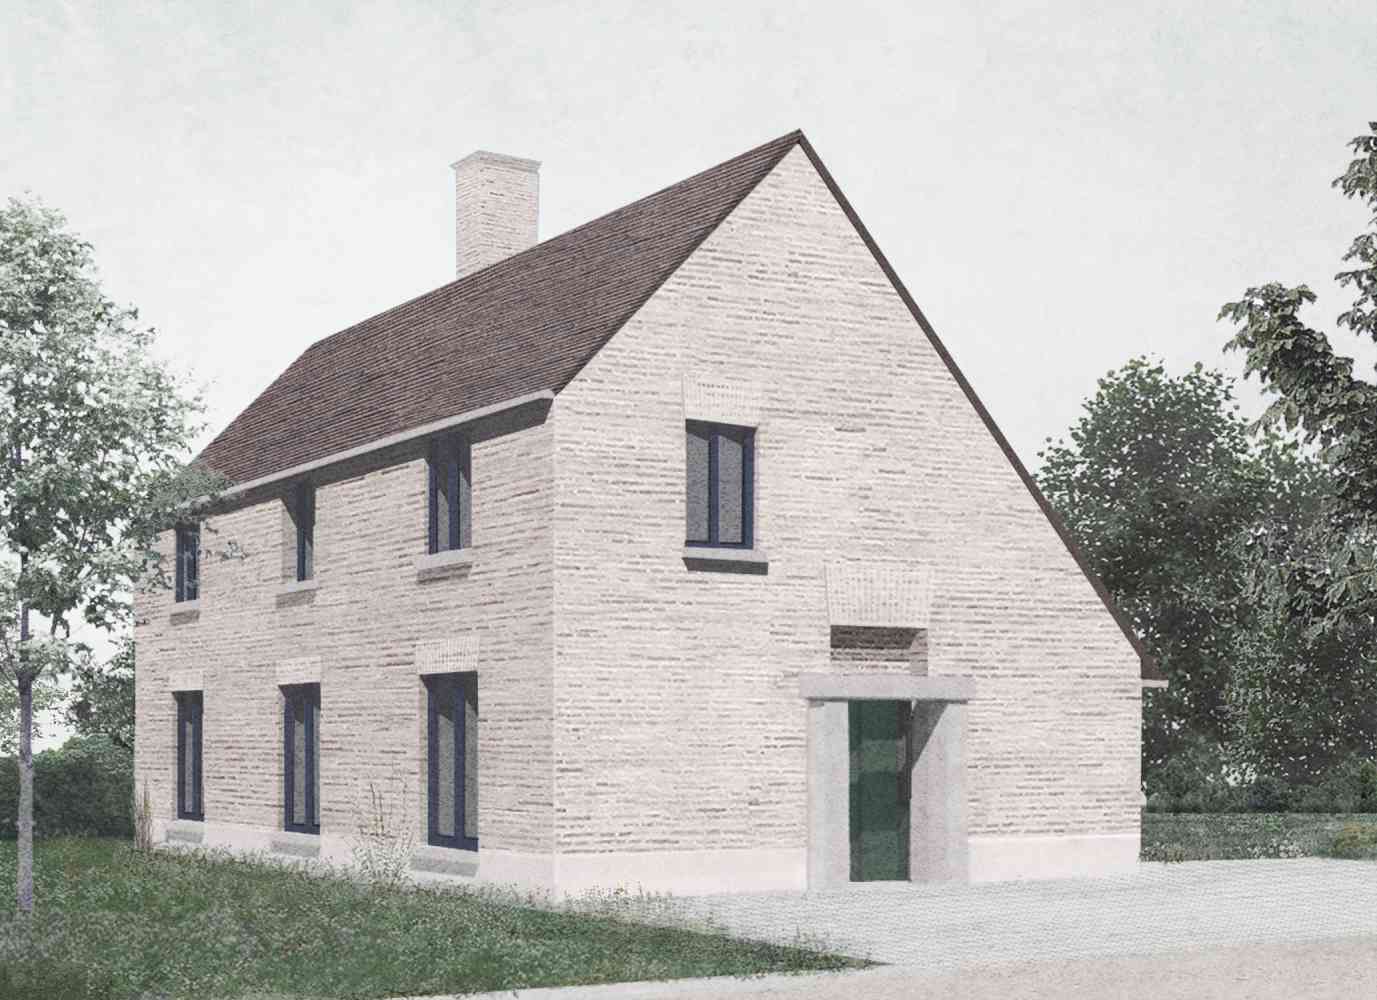 Village Development, 2021 - Eight new houses on a village edge site in Cambridgeshire. Planning approval granted 2019, construction 2021.